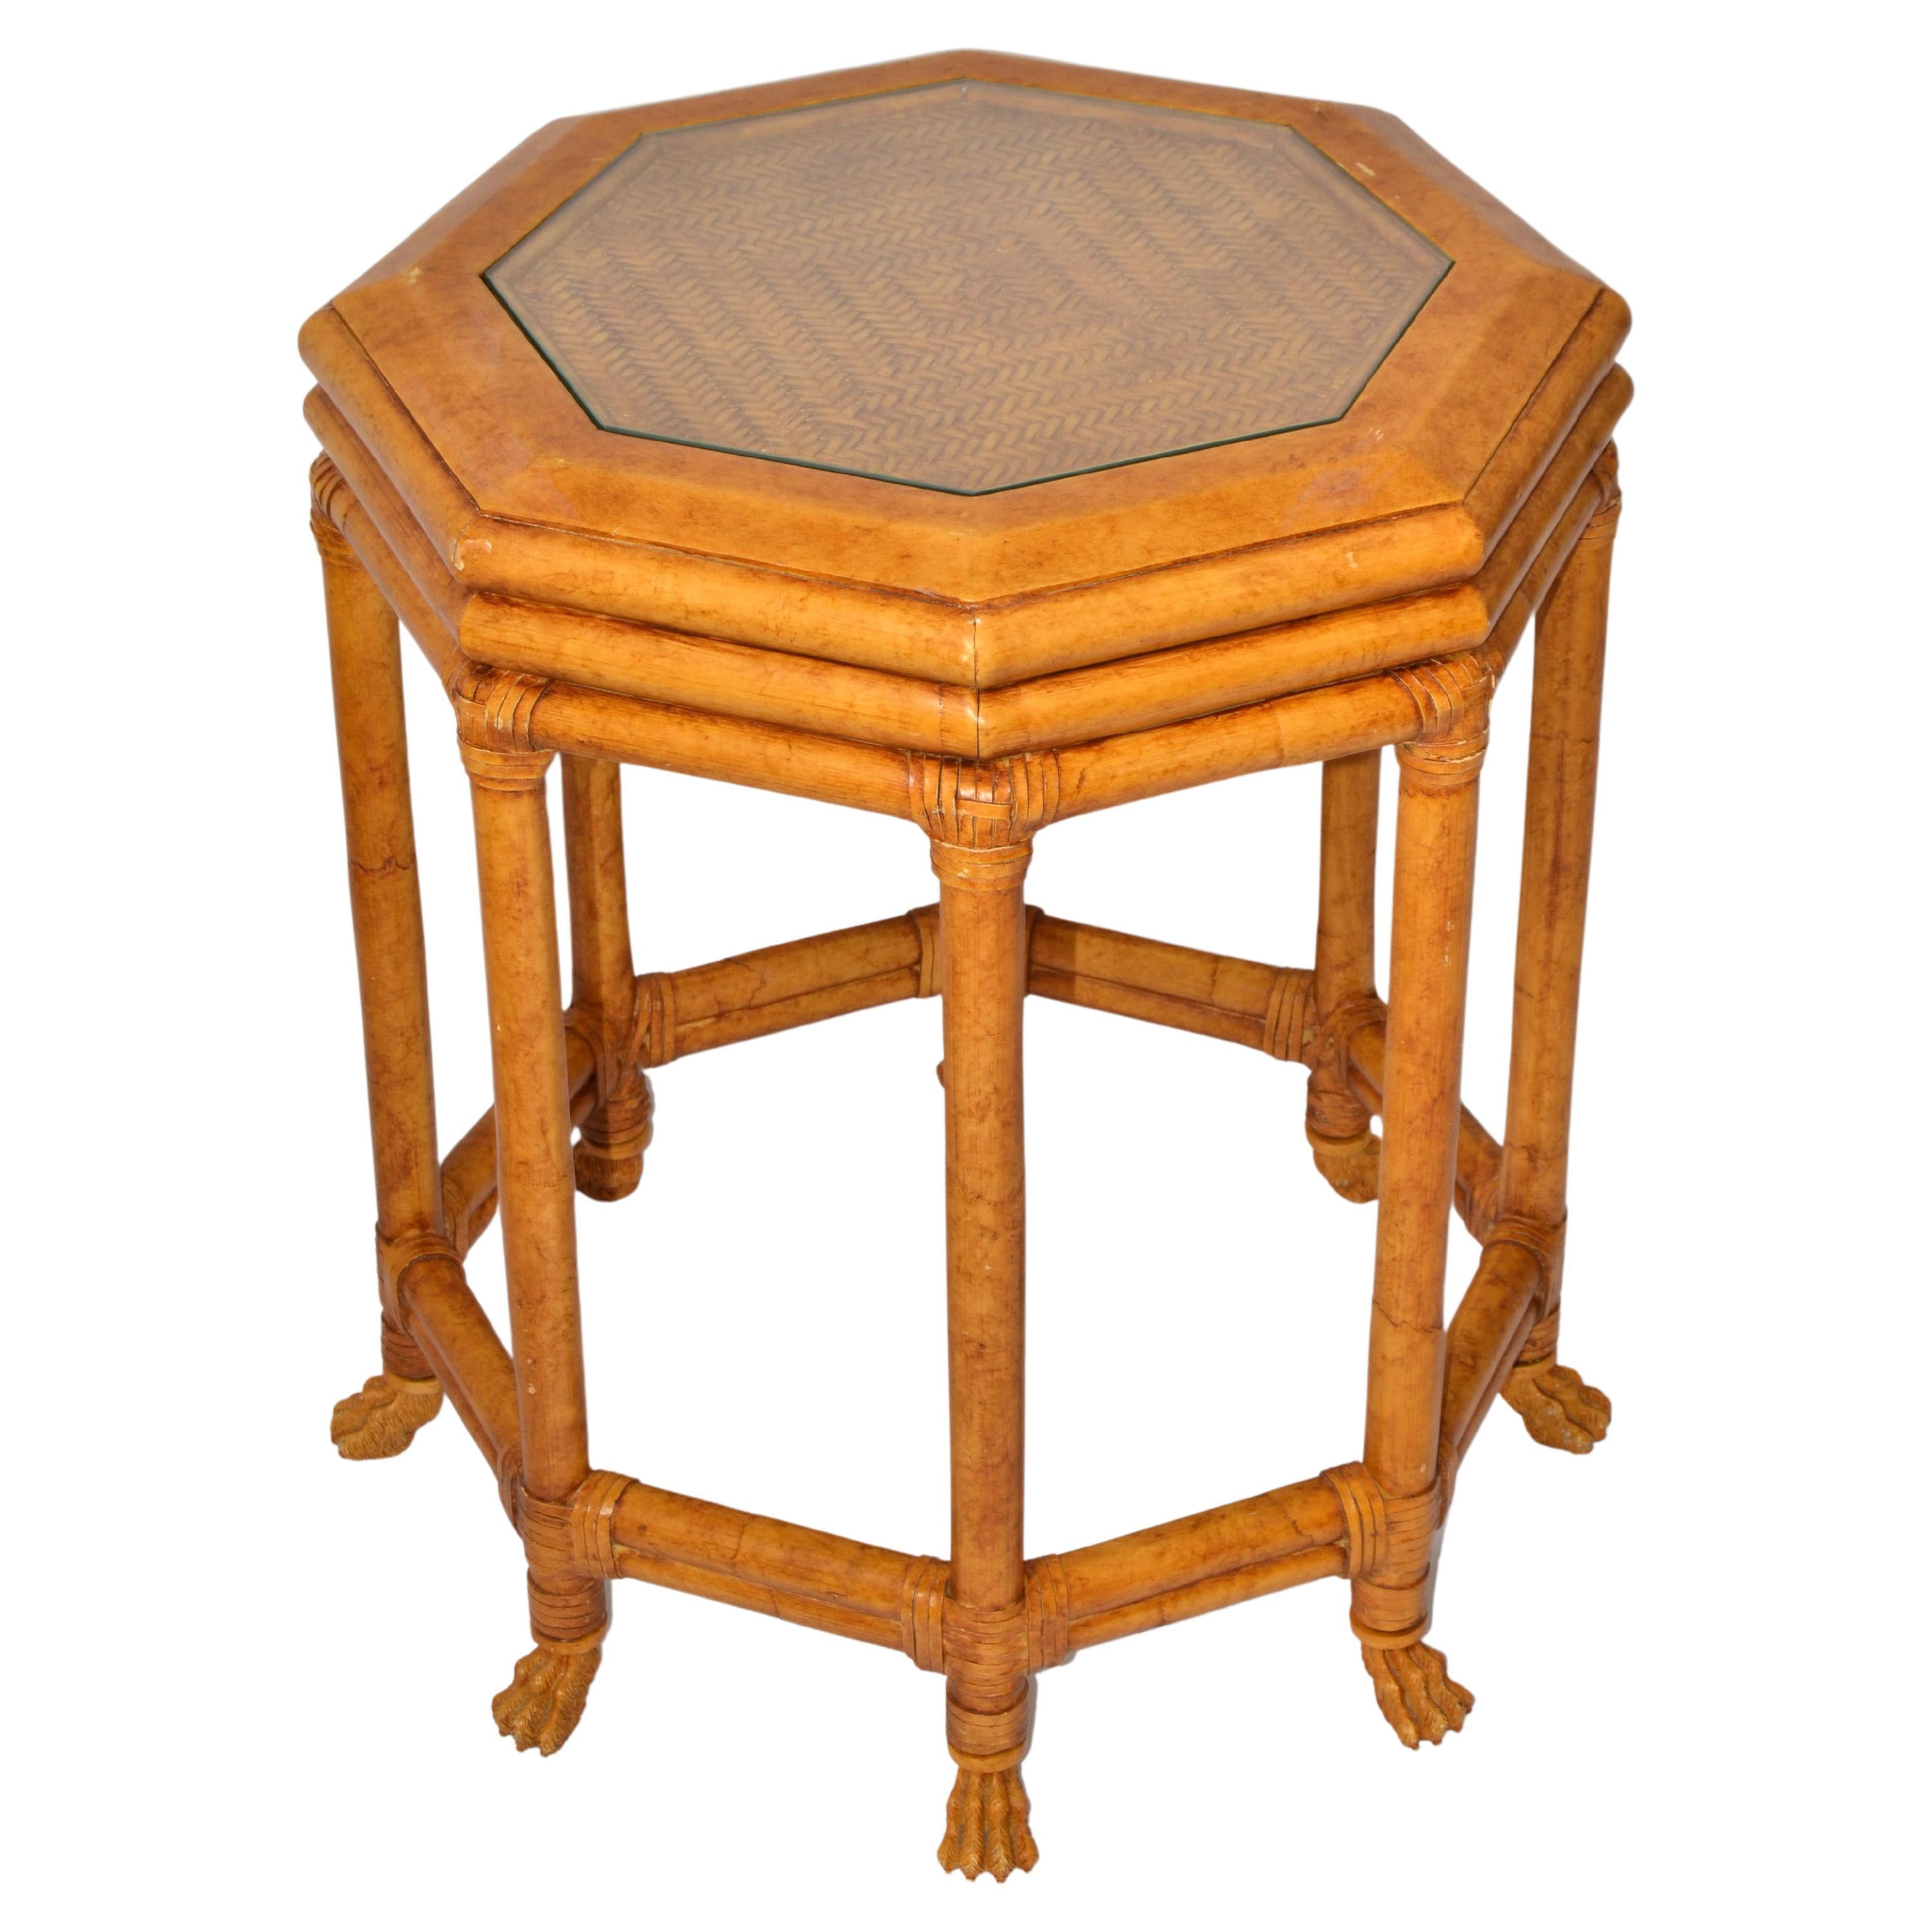 McGuire Style Octagonal Bamboo Burl Veneer Leather Bindings Glass Accent Table  For Sale